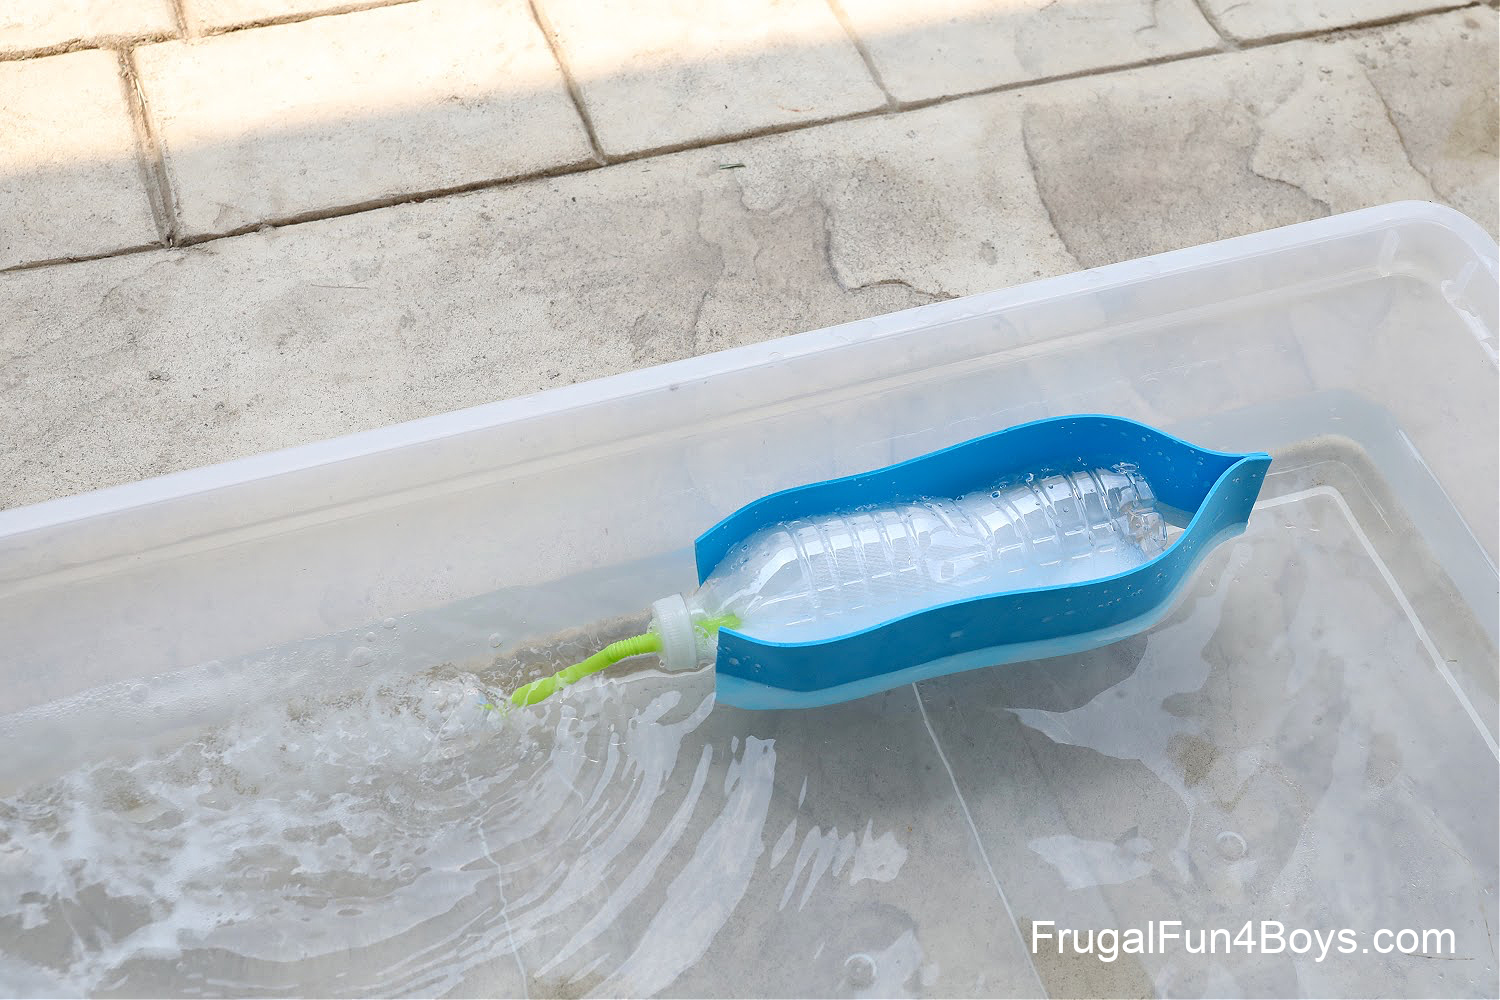 Baking soda and vinegar powered boat made with a plastic water bottle.